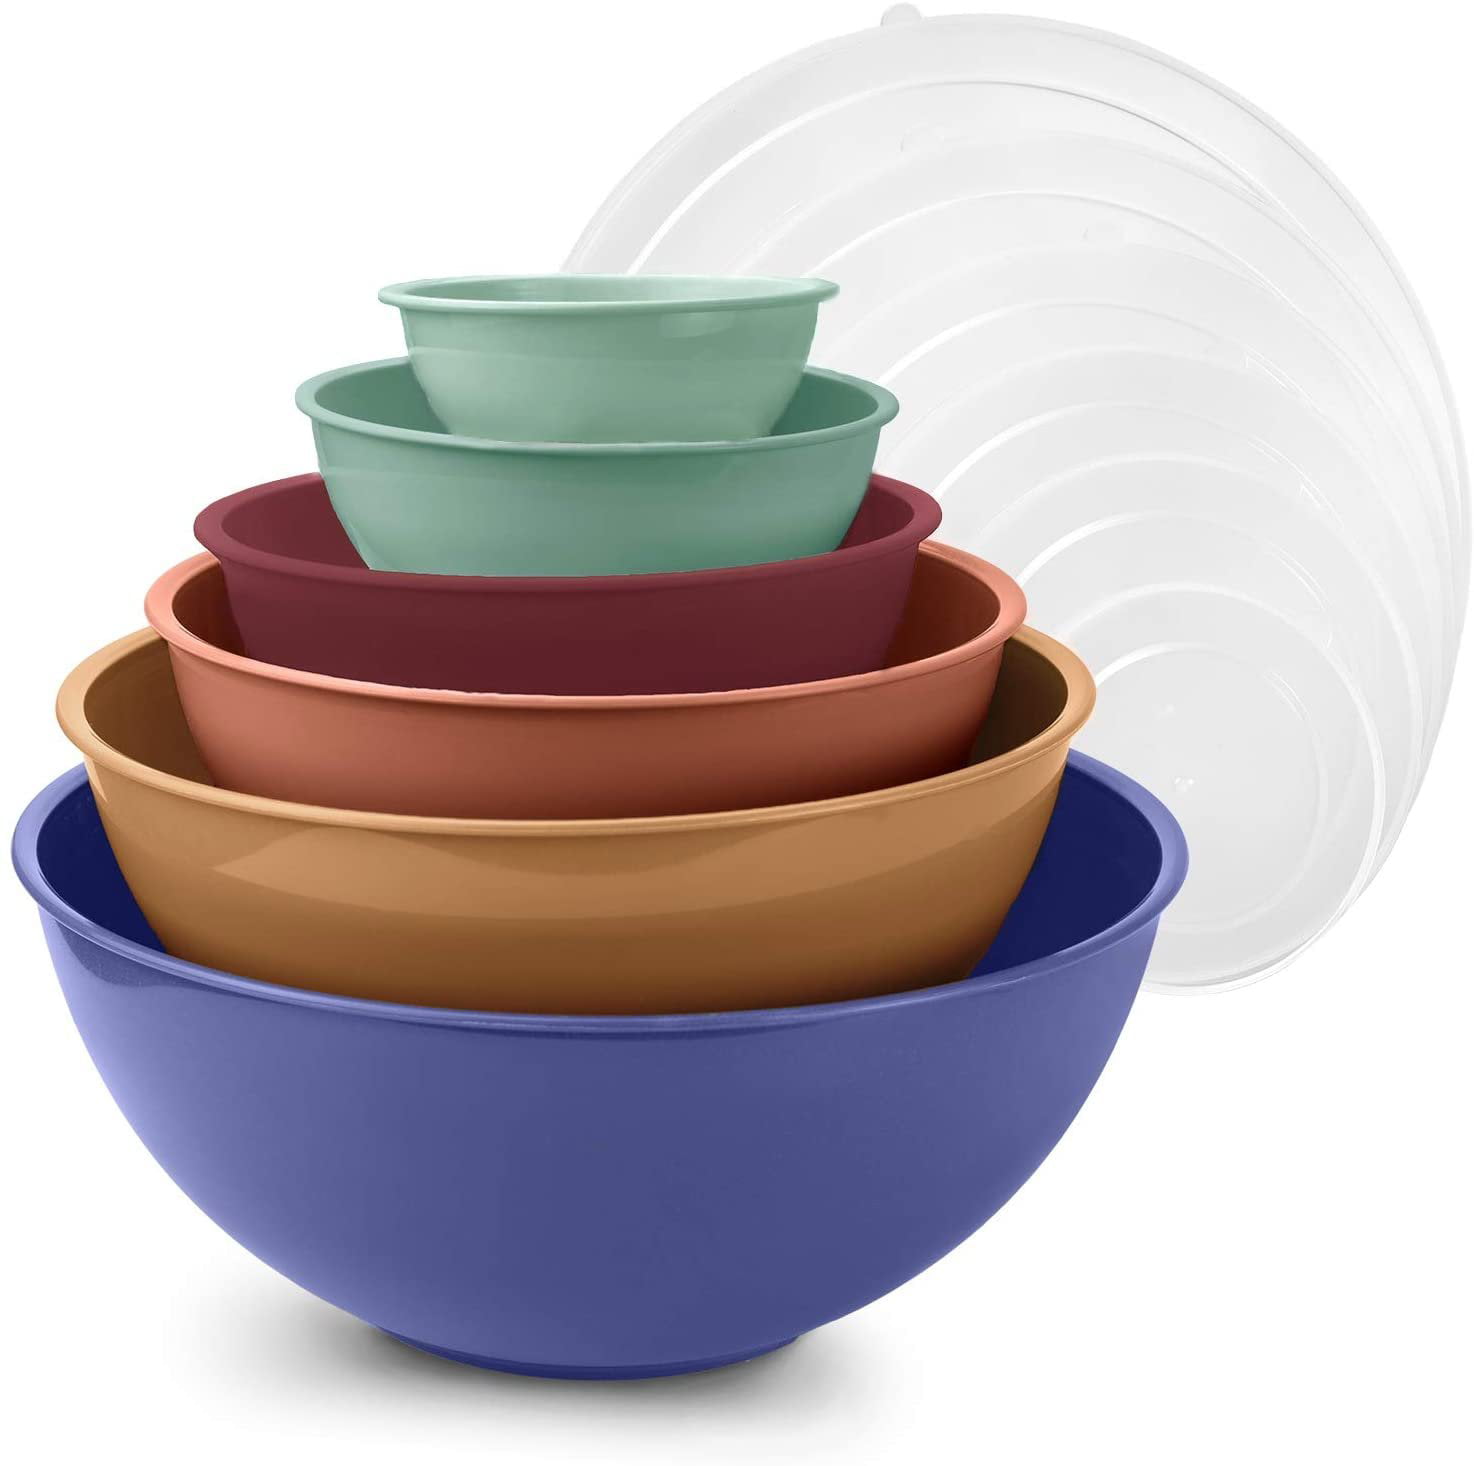 10 Strawberry Street Melamine Colored Mixing Bowls with Lids (Set of 6) -  Bed Bath & Beyond - 8075296